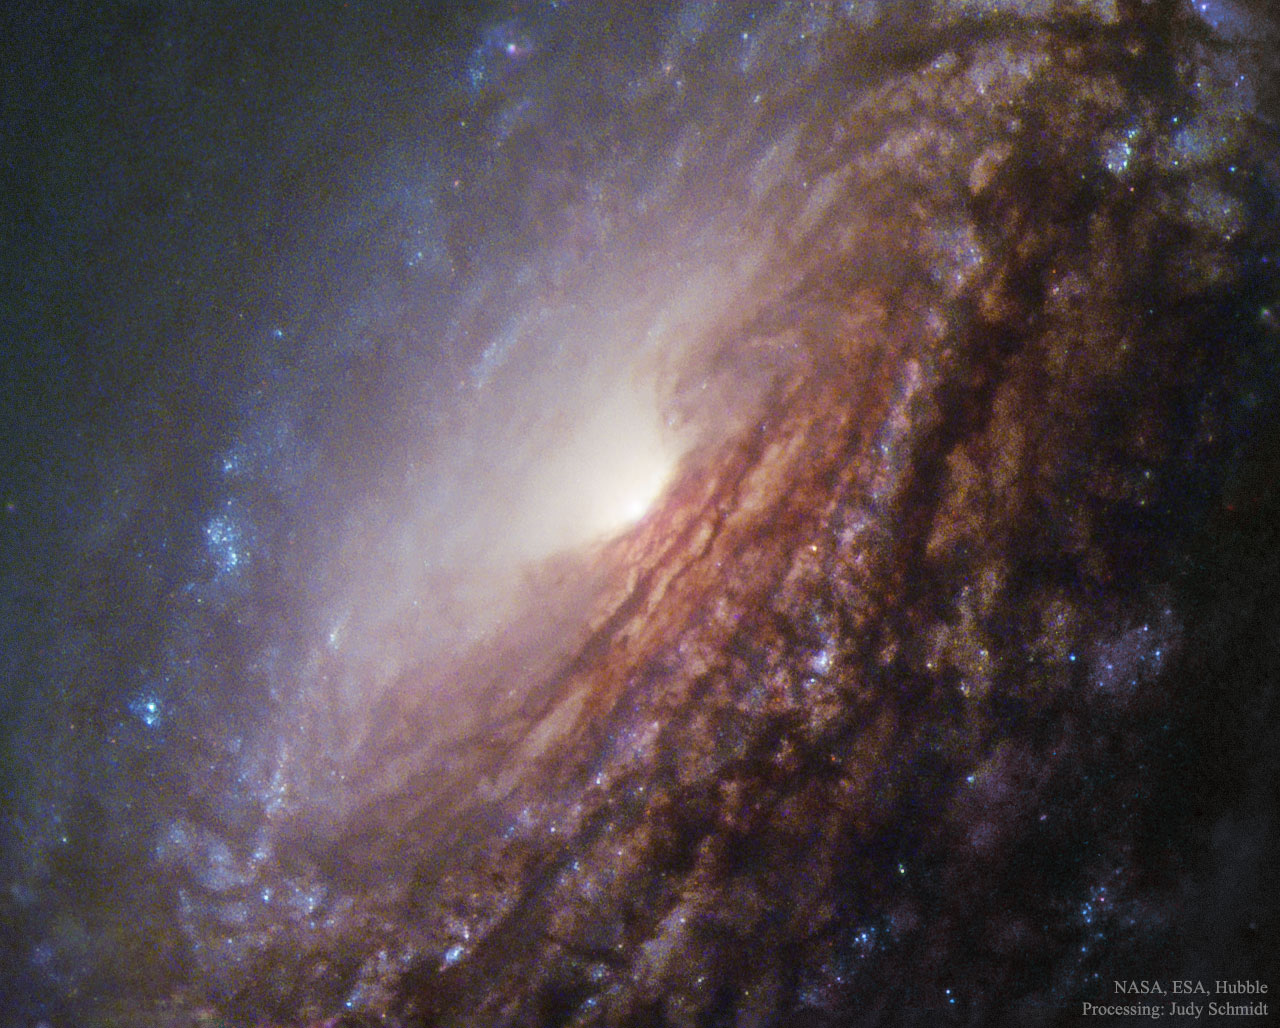 Astronomy Picture of the Day NGC5033_HubbleSchmidt_1280